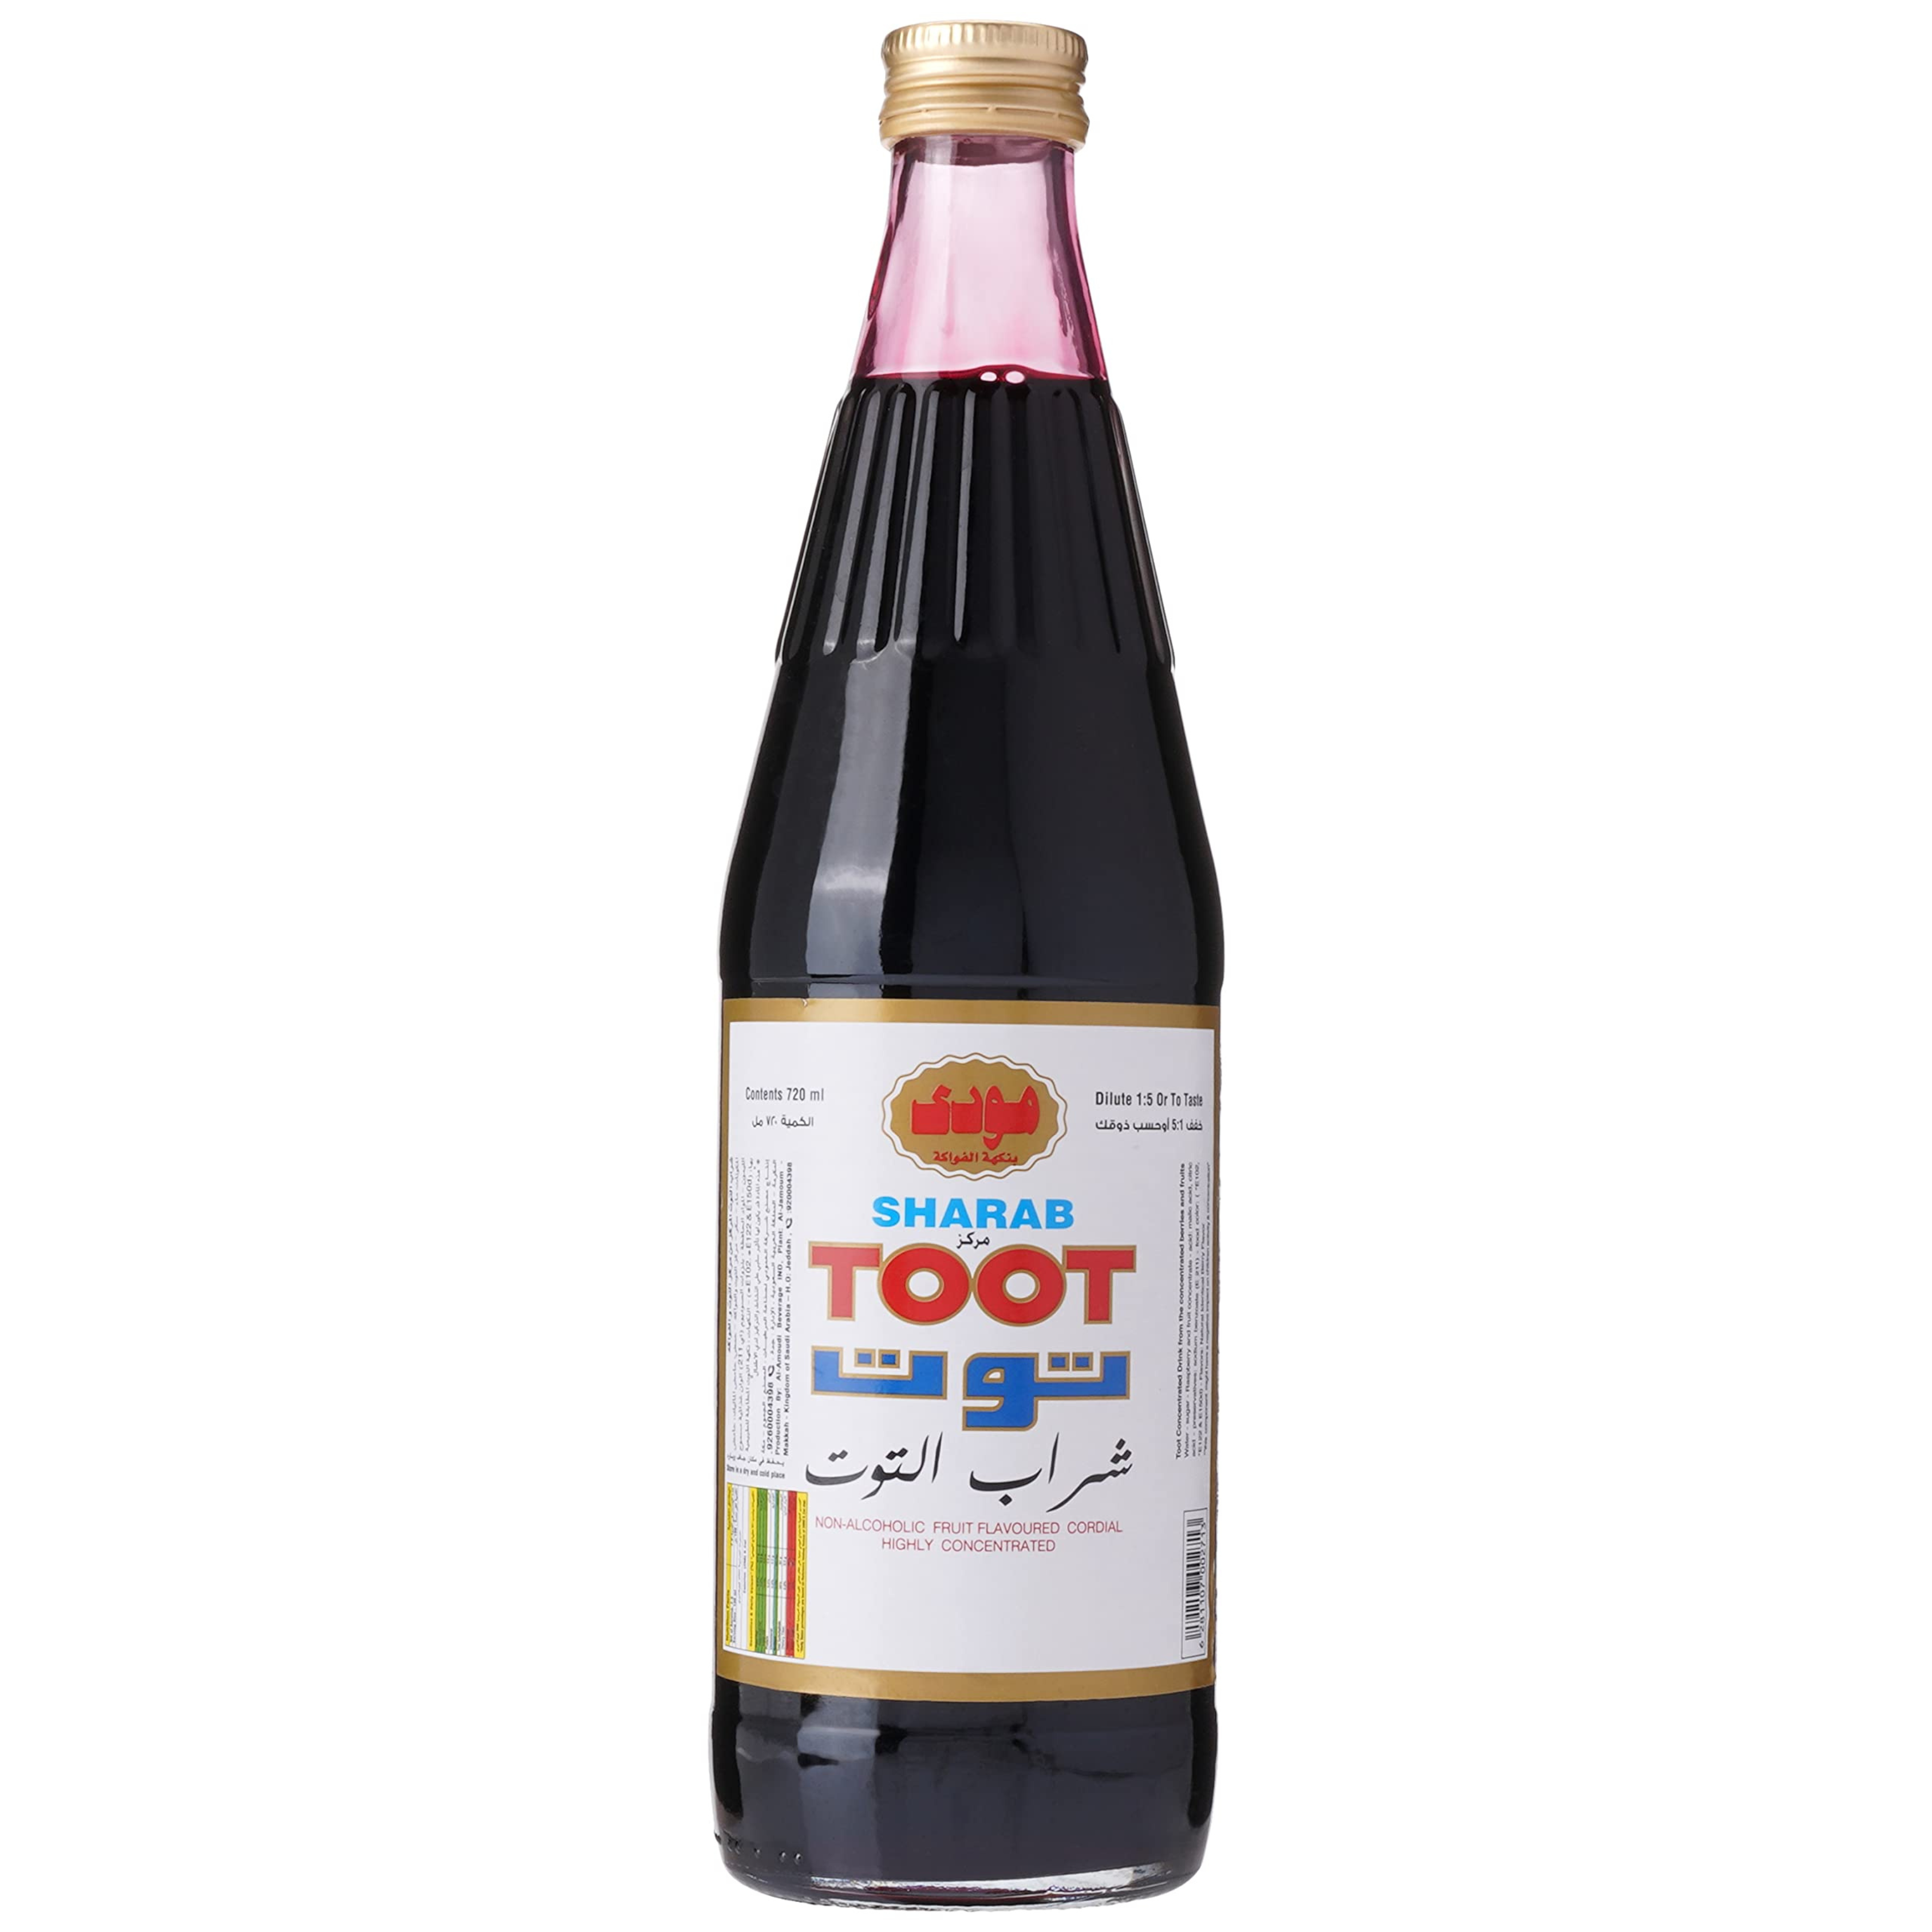 Sharab Toot Cordial, 720 Ml - Pack Of 1